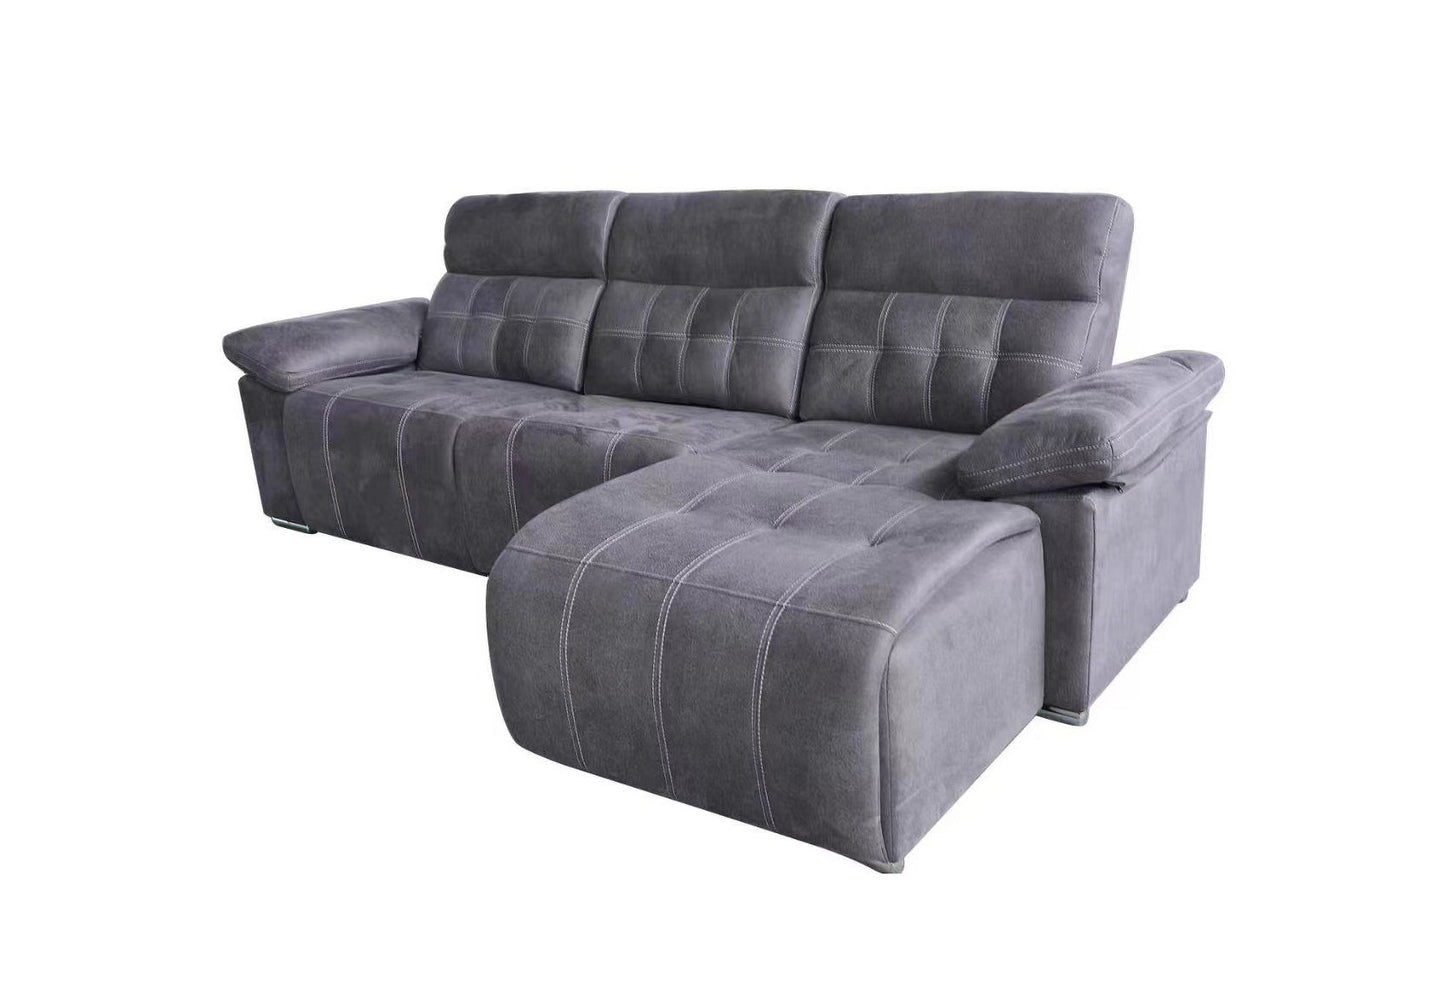 PLUSH RECLINER SECTIONAL